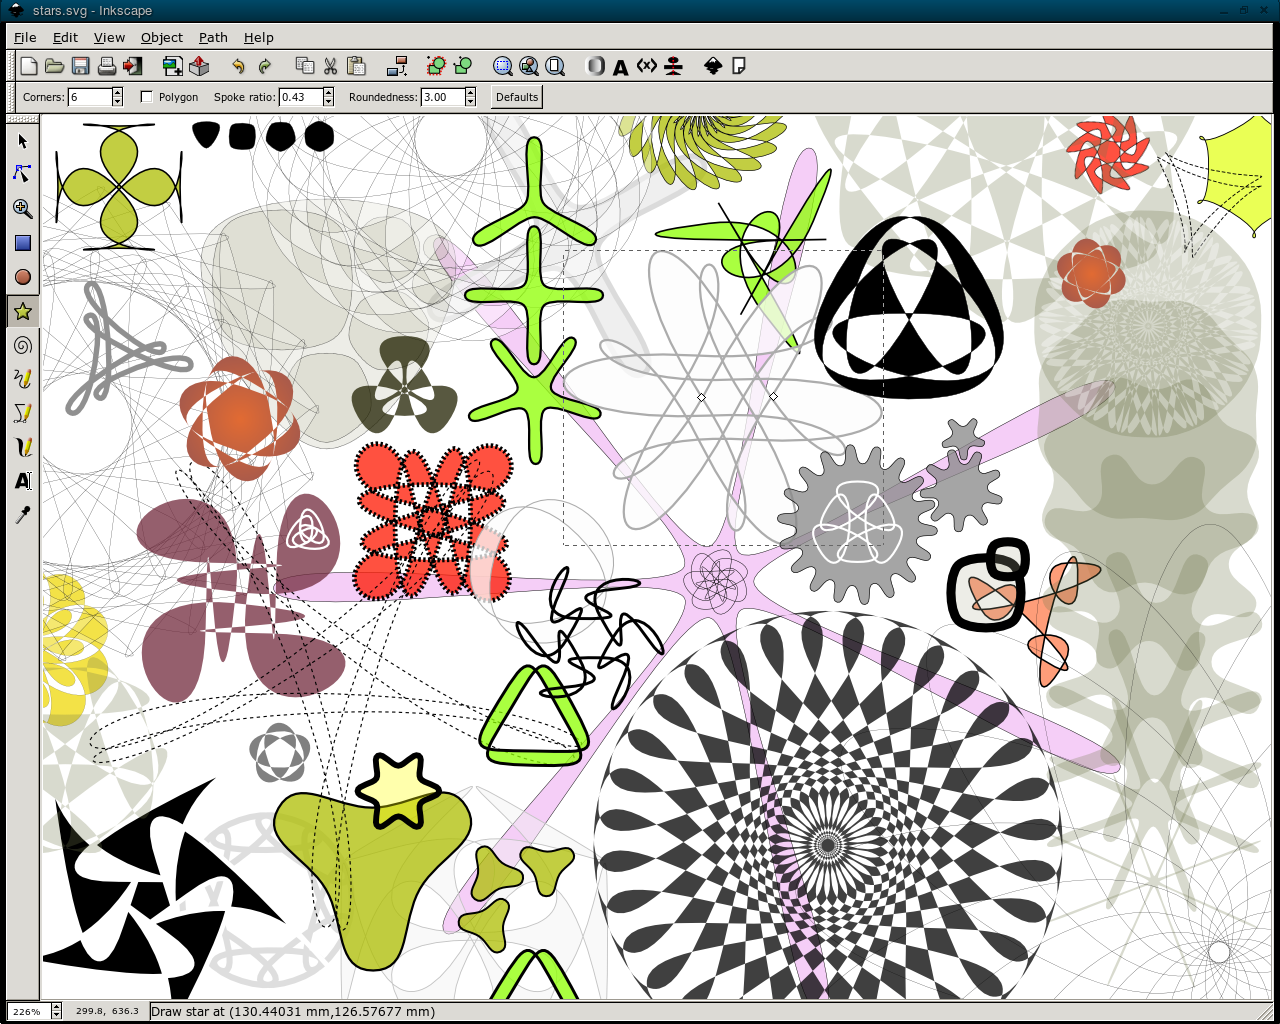 latest version of inkscape for windows 10